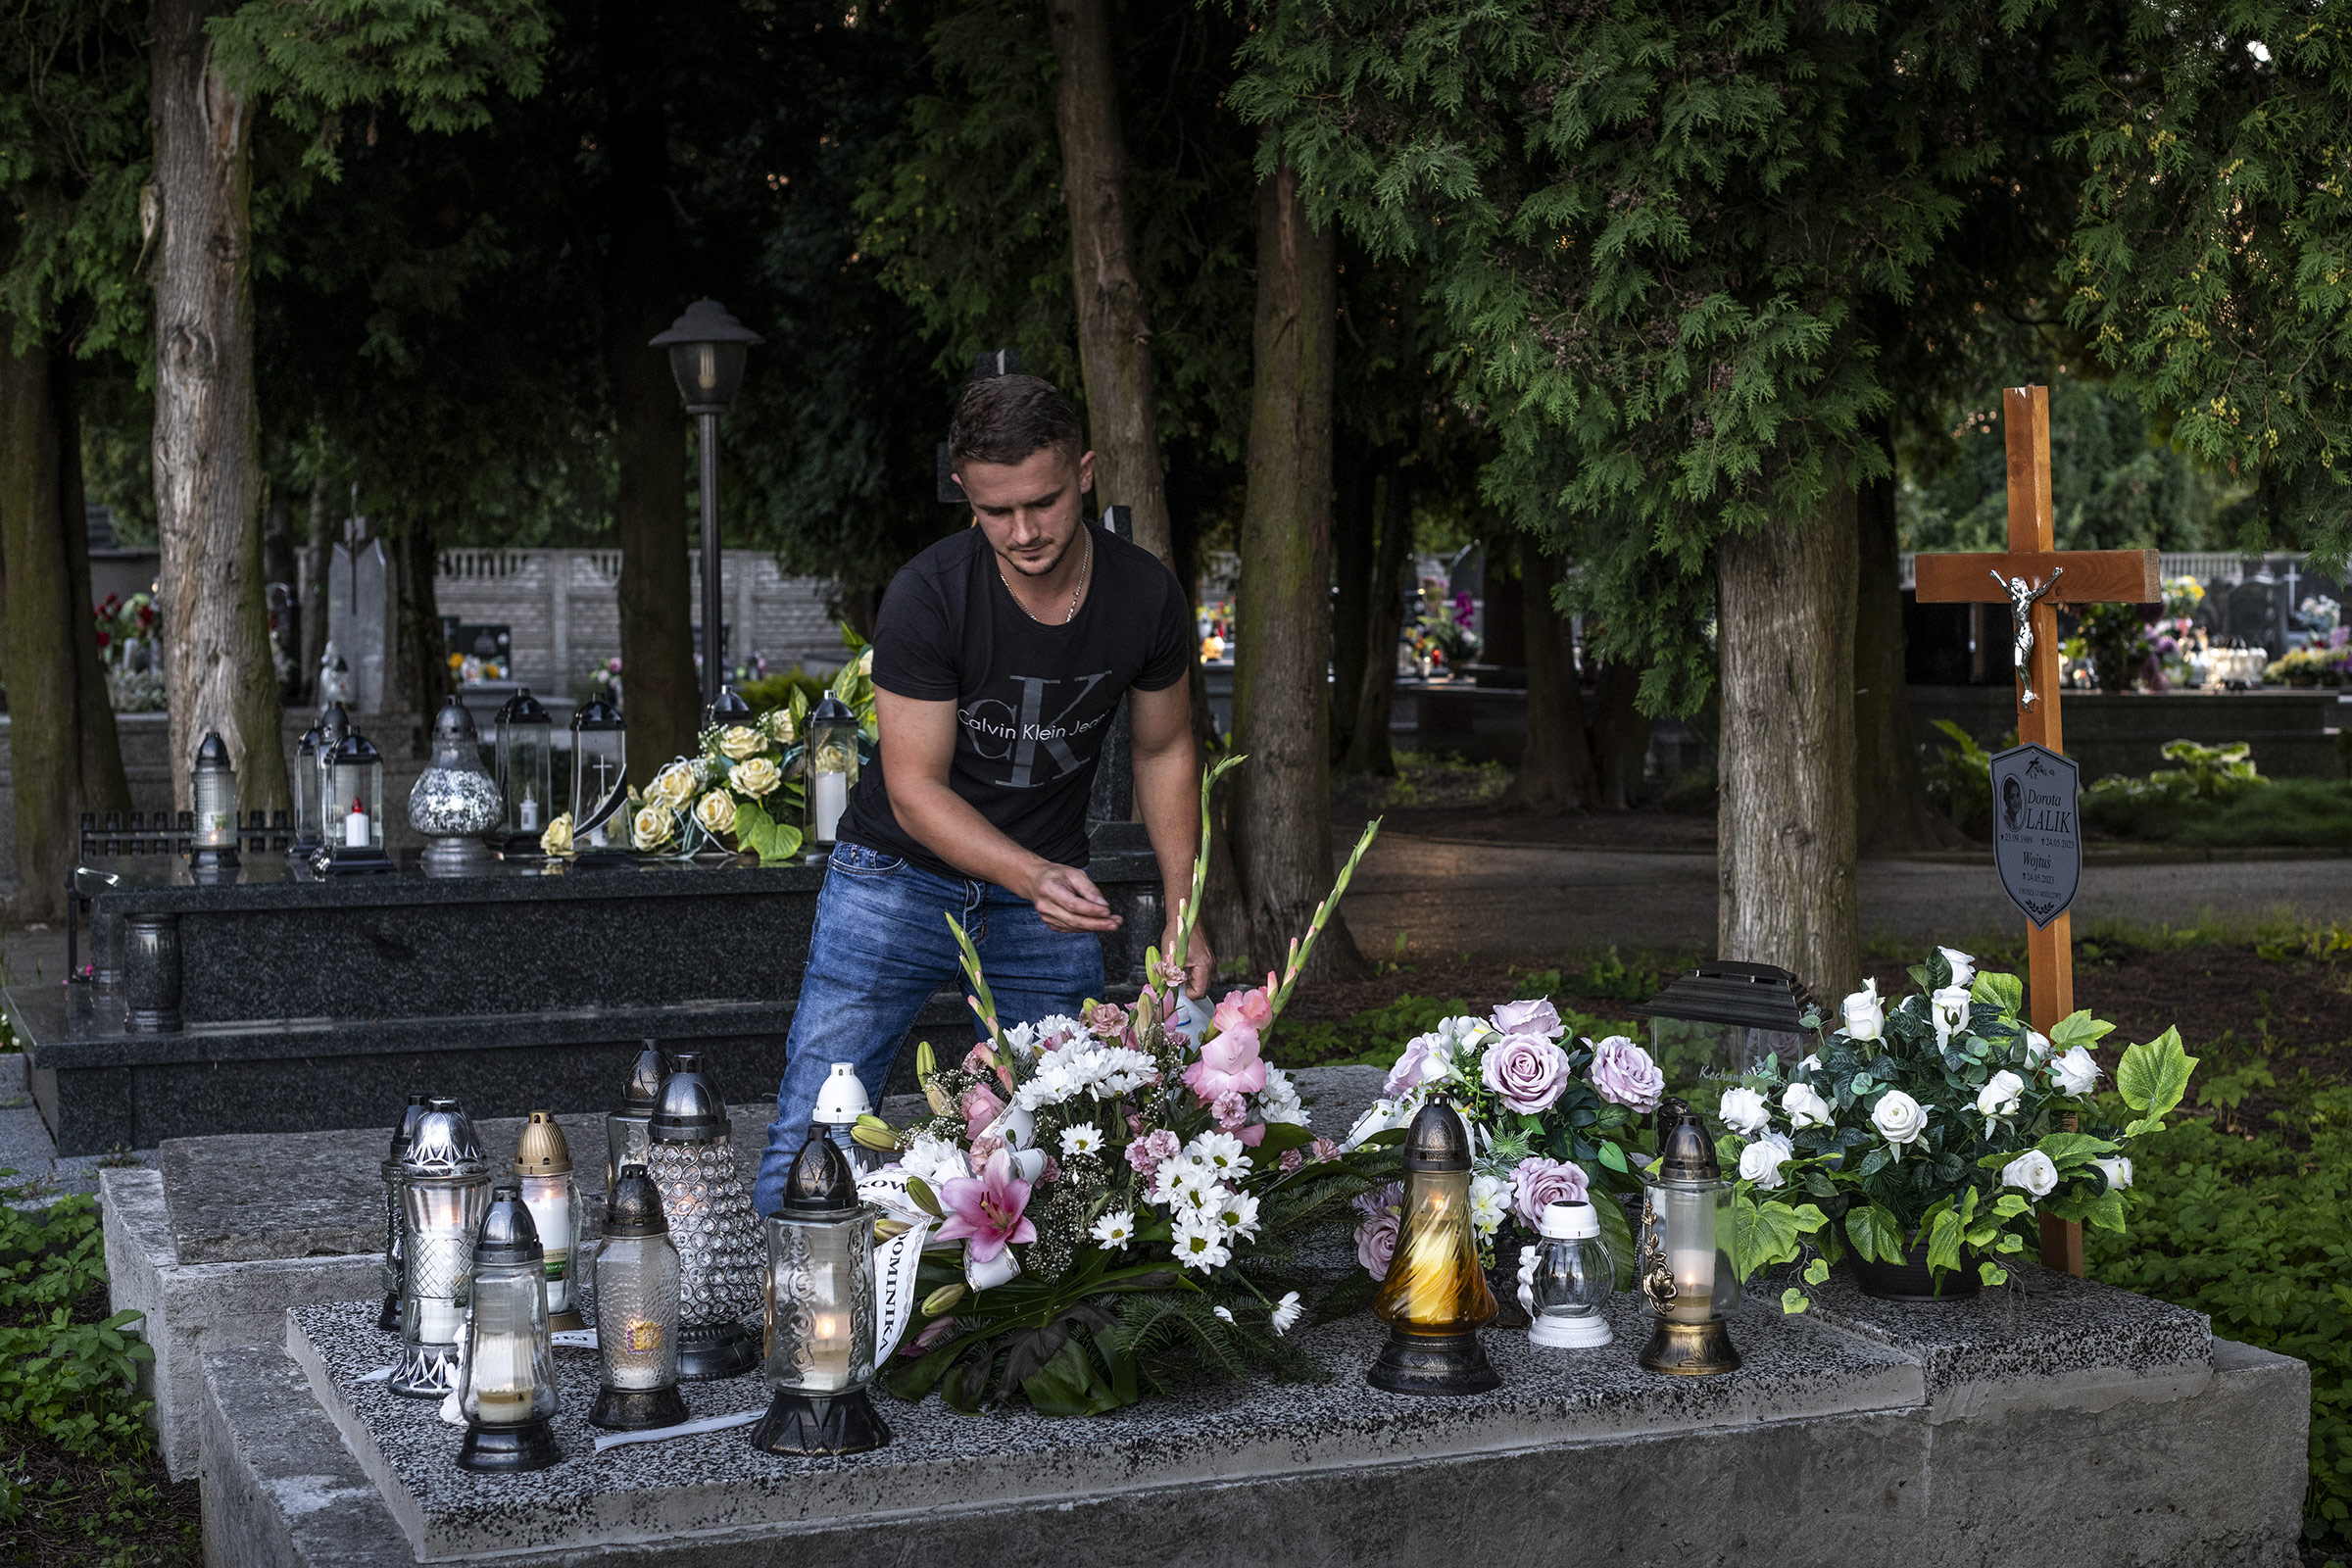 Marcin Lalik visits the grave of his wife Dorota and their son every day after work.